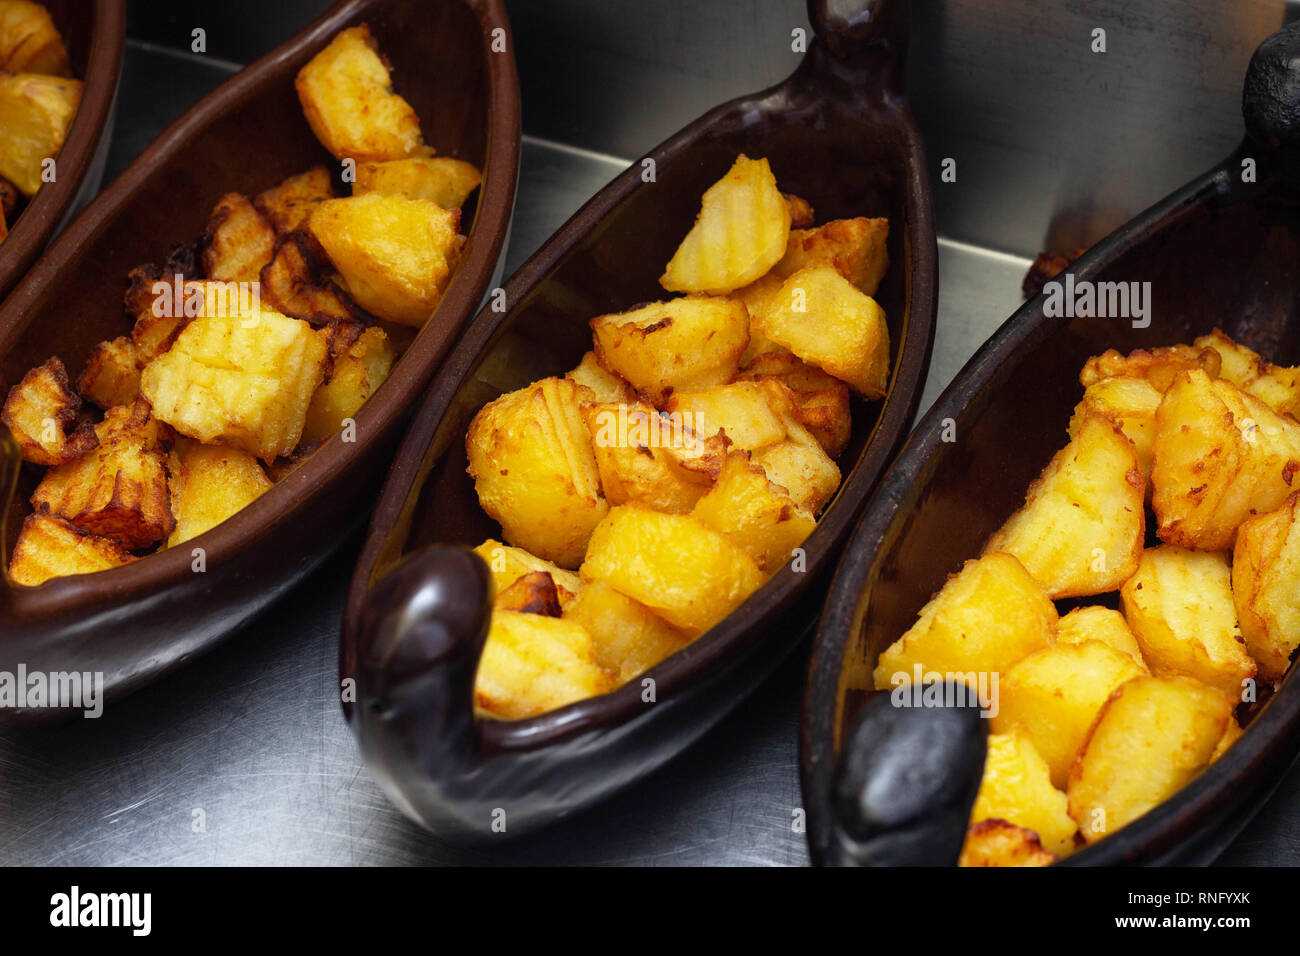 Restaurant dish of a boat with potatoes in a golden crust fried in a deep fryer. close-up, cholesterol Stock Photo